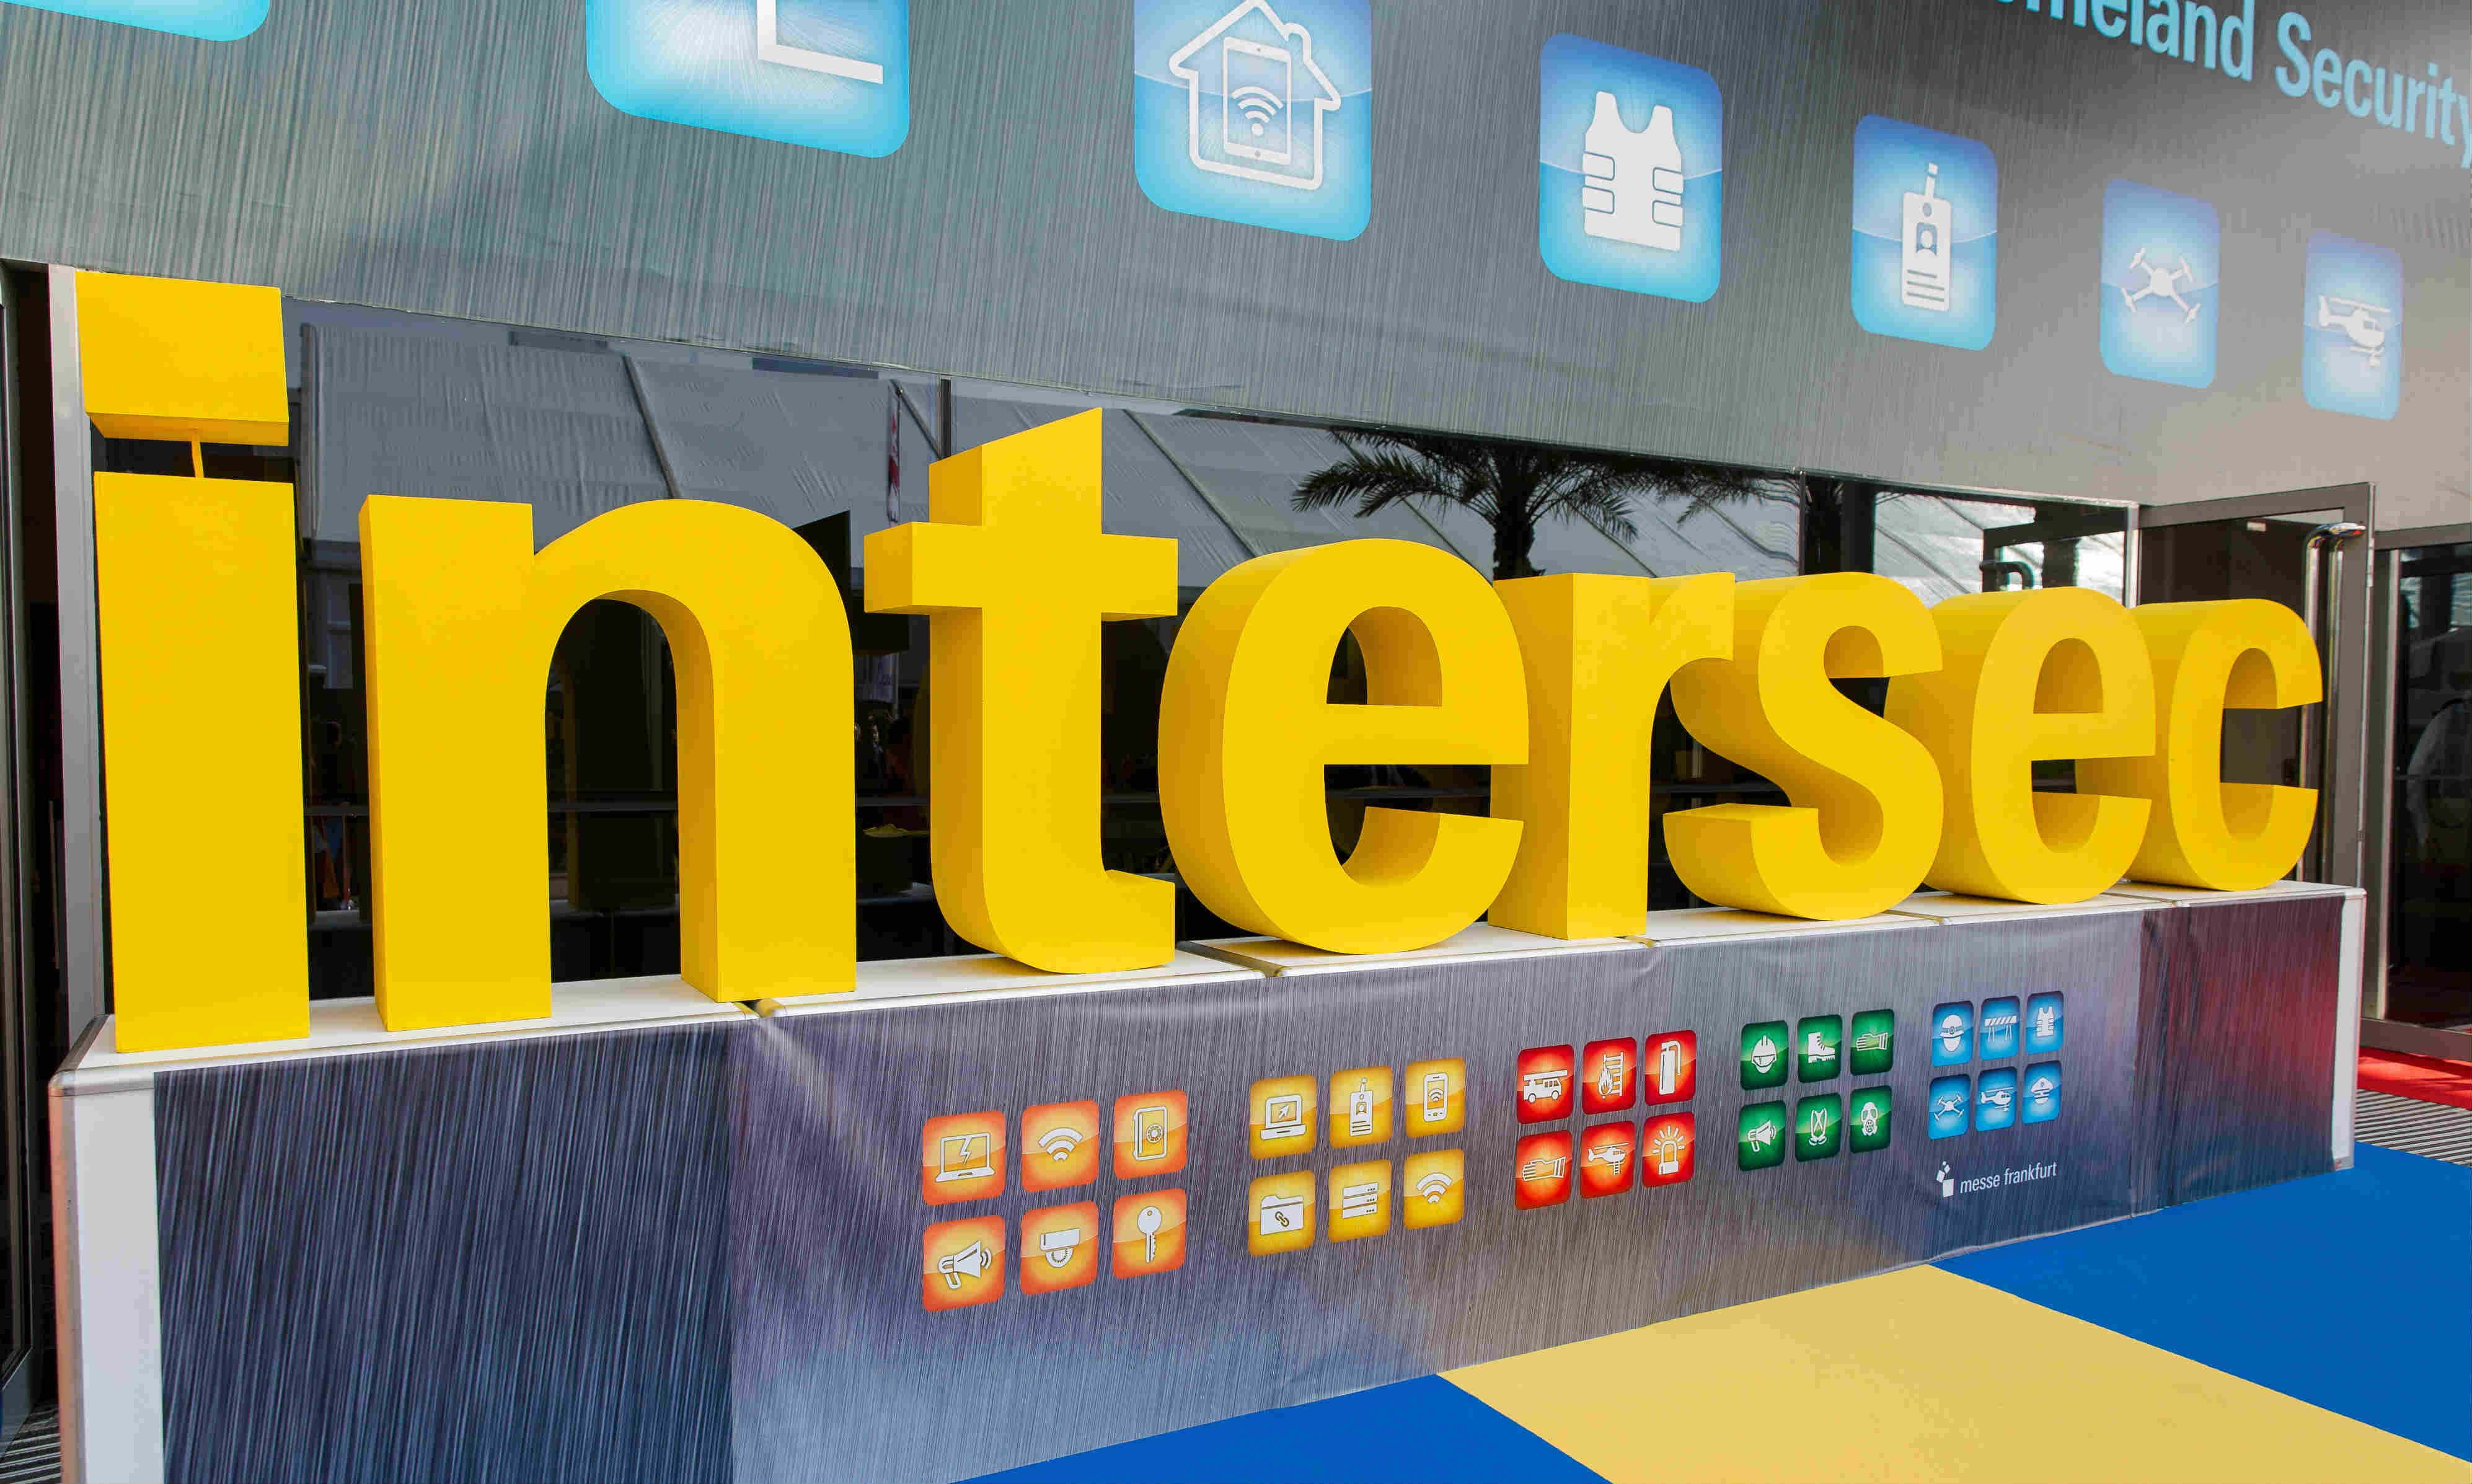 Germany, UK, France, Italy lead international exhibitor charge at Intersec 2017 in Dubai